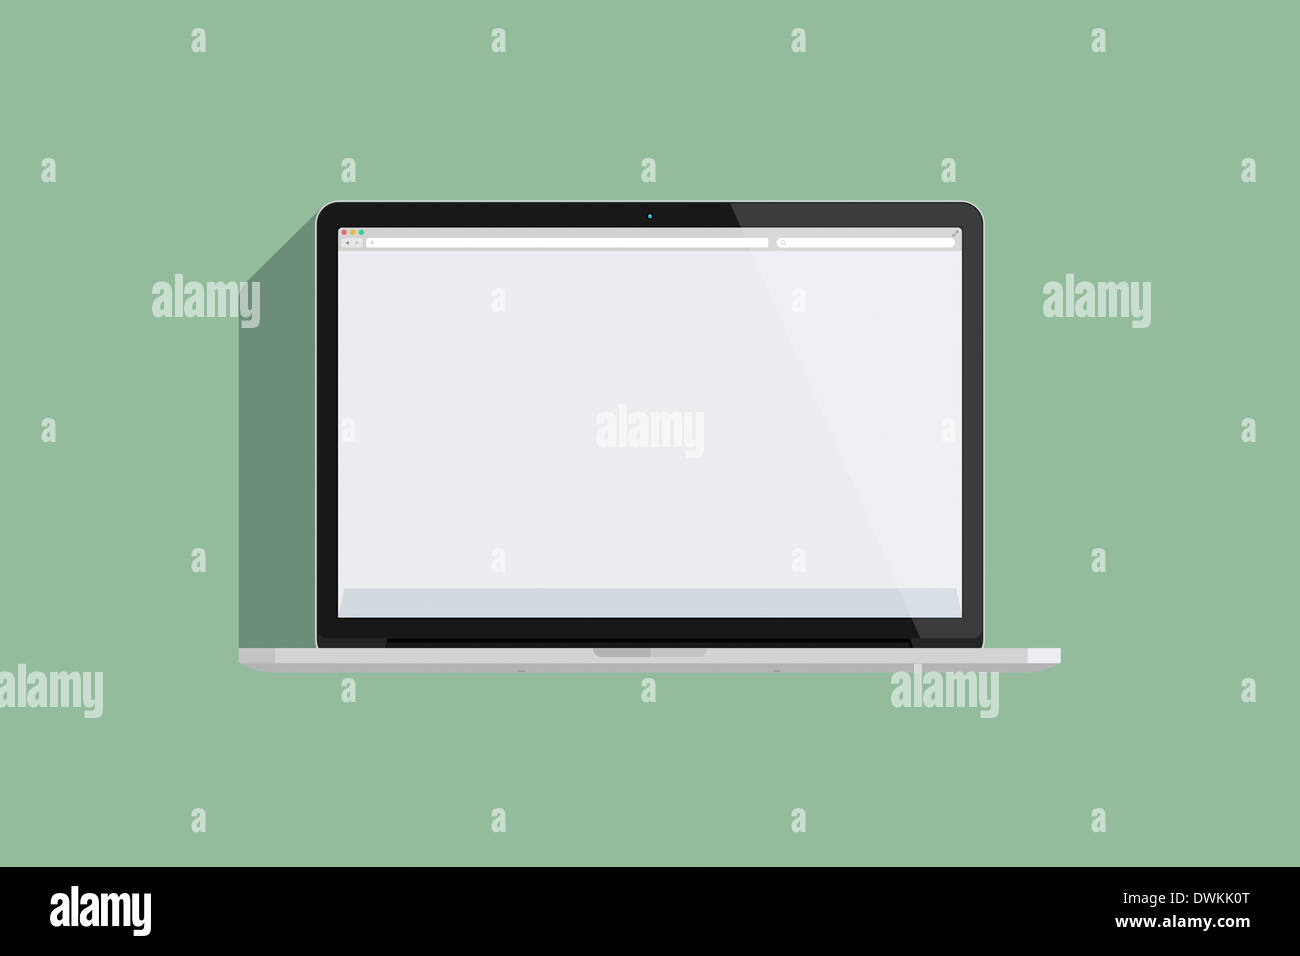 Illustration of a mac book, green background. Stock Photo